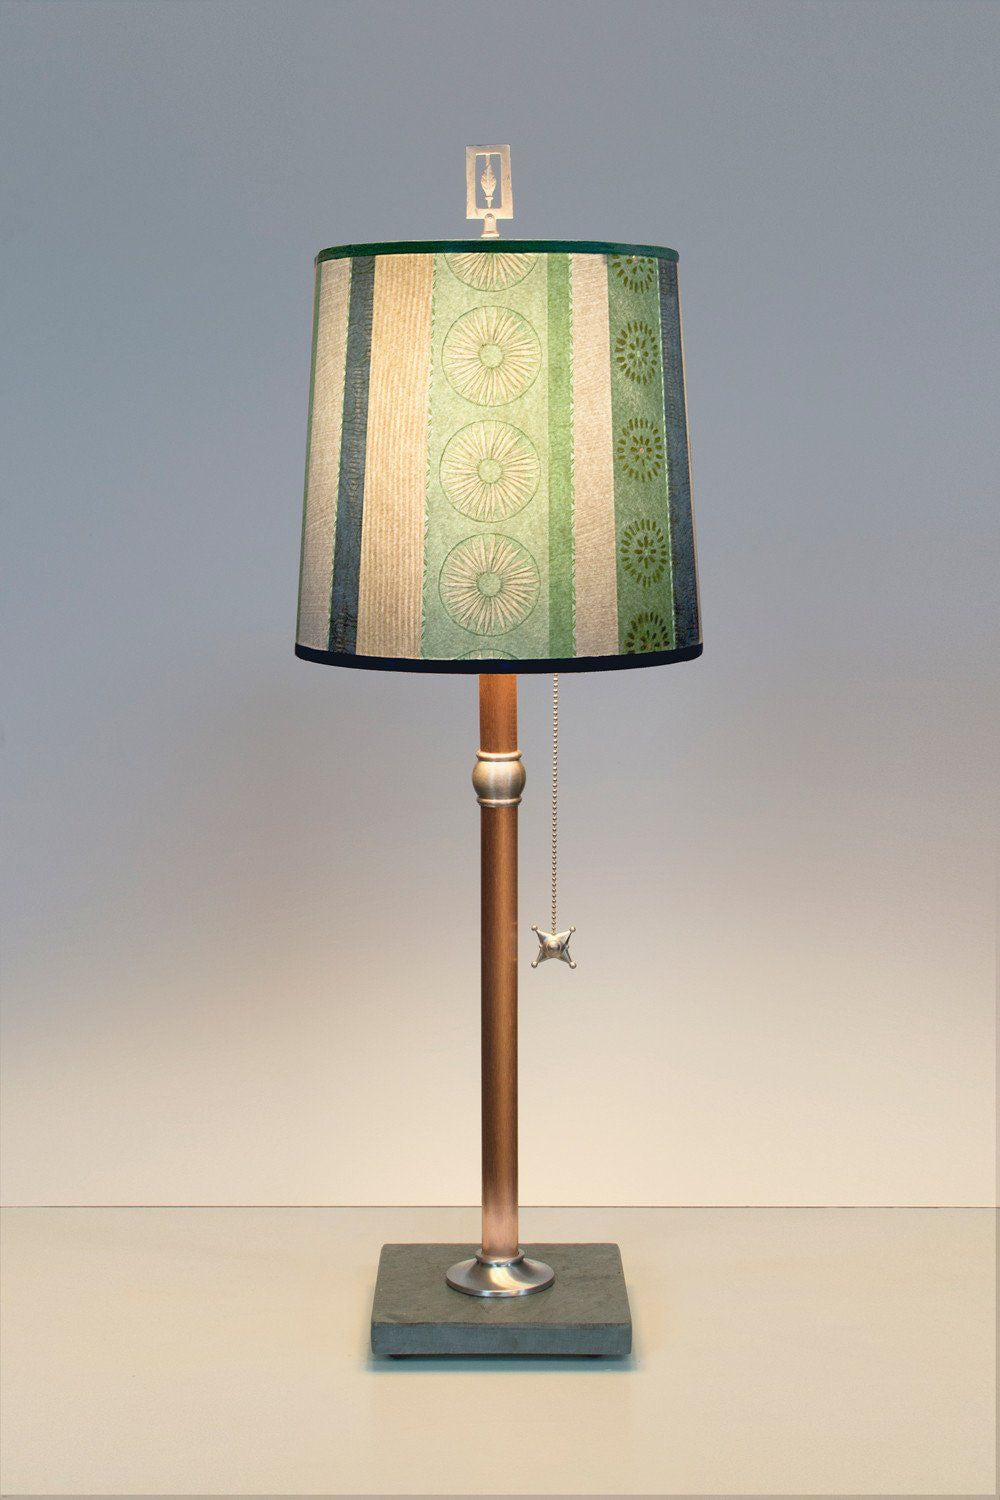 Janna Ugone & Co Table Lamps Copper Table Lamp with Medium Drum Shade in Serape Waters